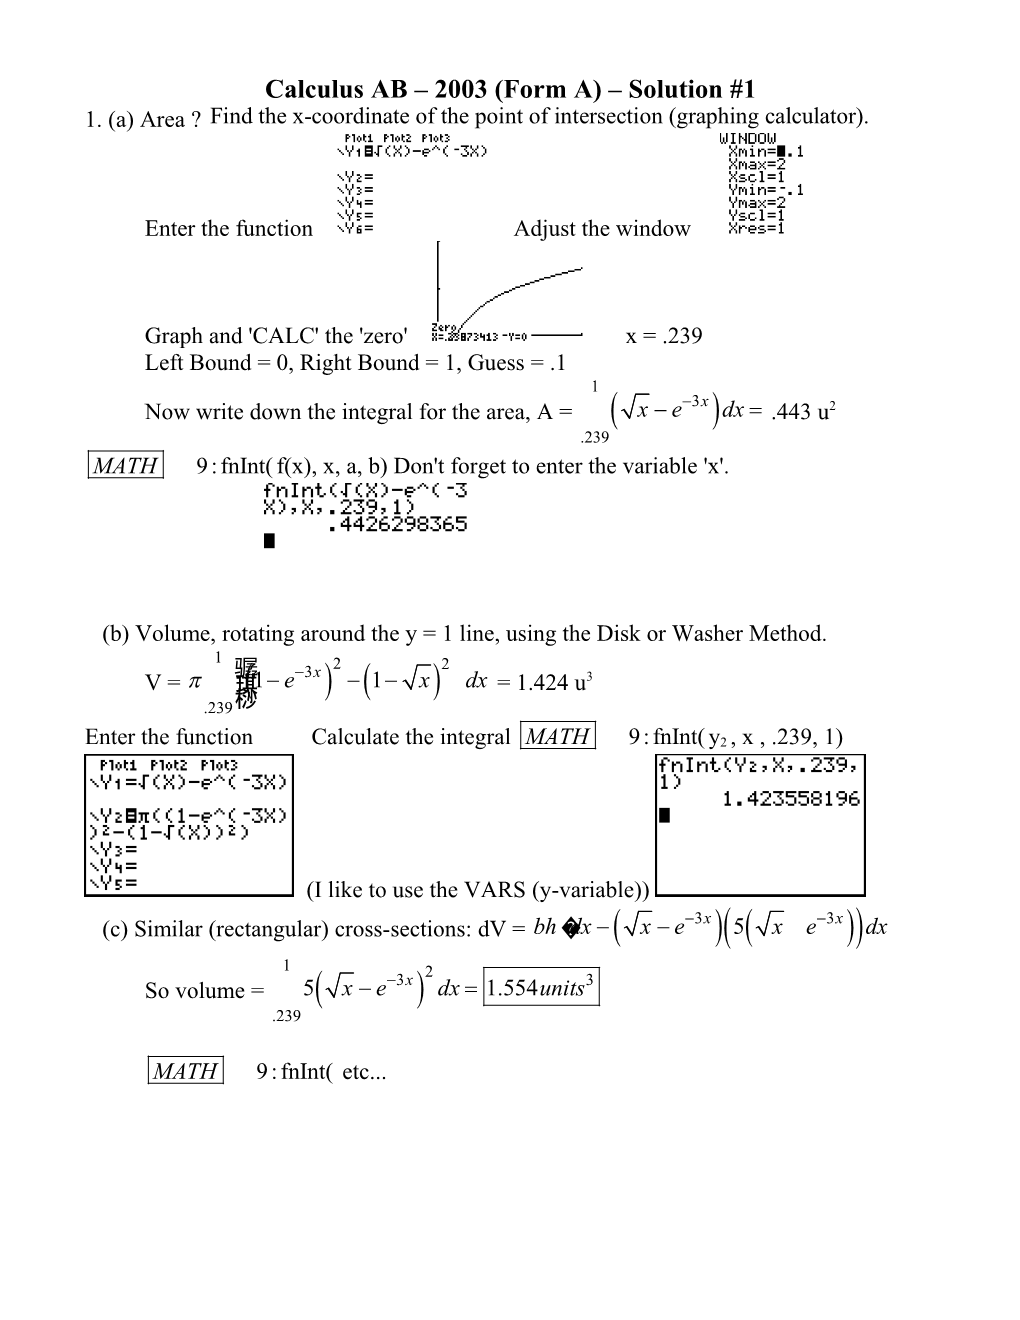 Calculus AB 2003 (Form A) Solutions